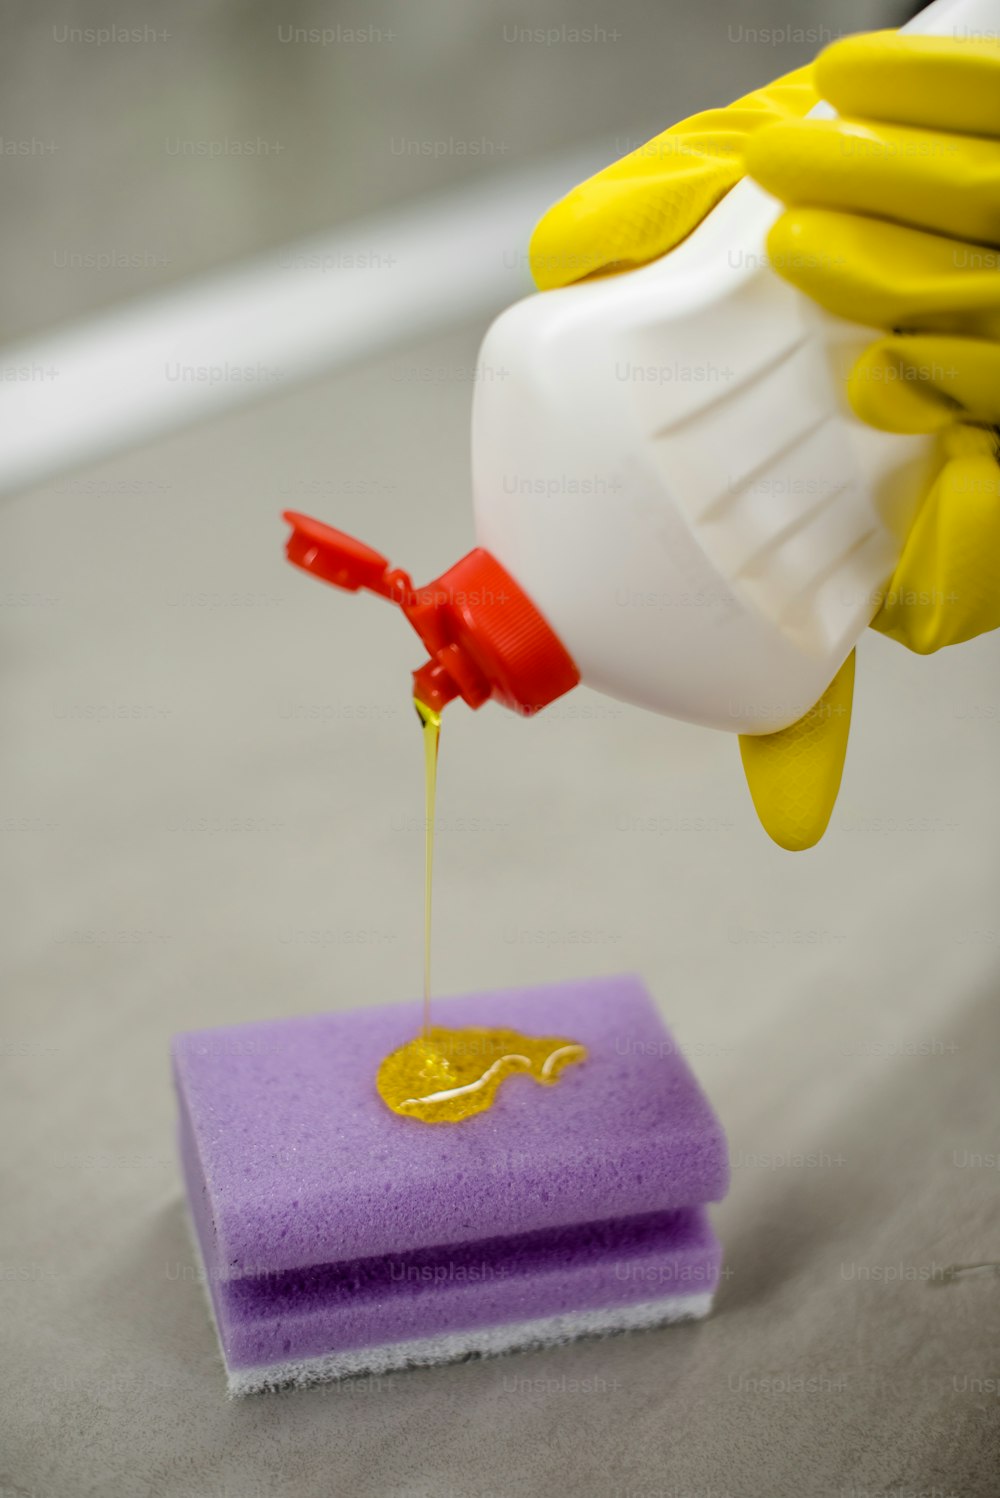 a person in yellow gloves is pouring yellow liquid onto a sponge